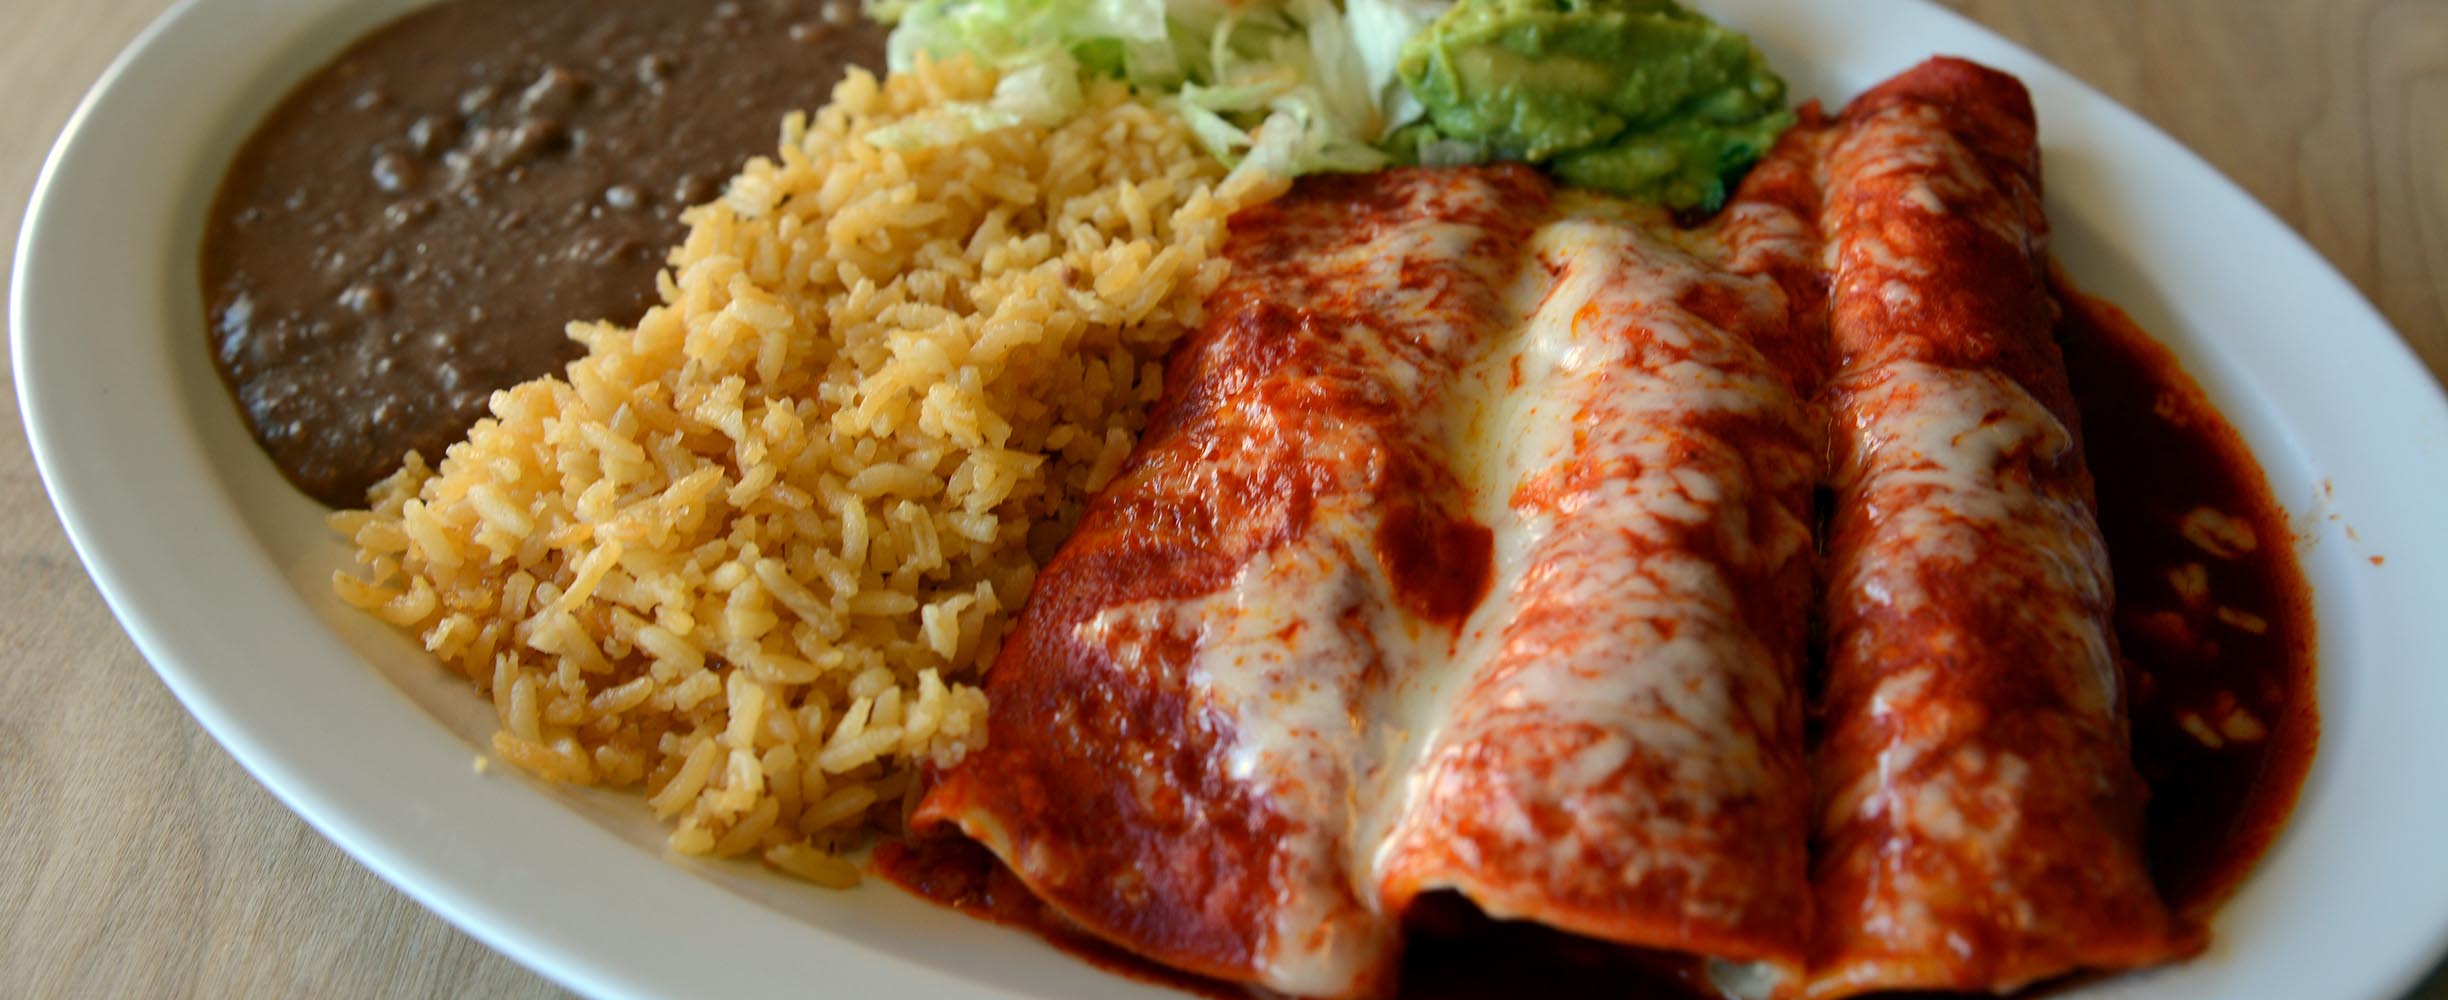 Typical Mexican food Flautas.